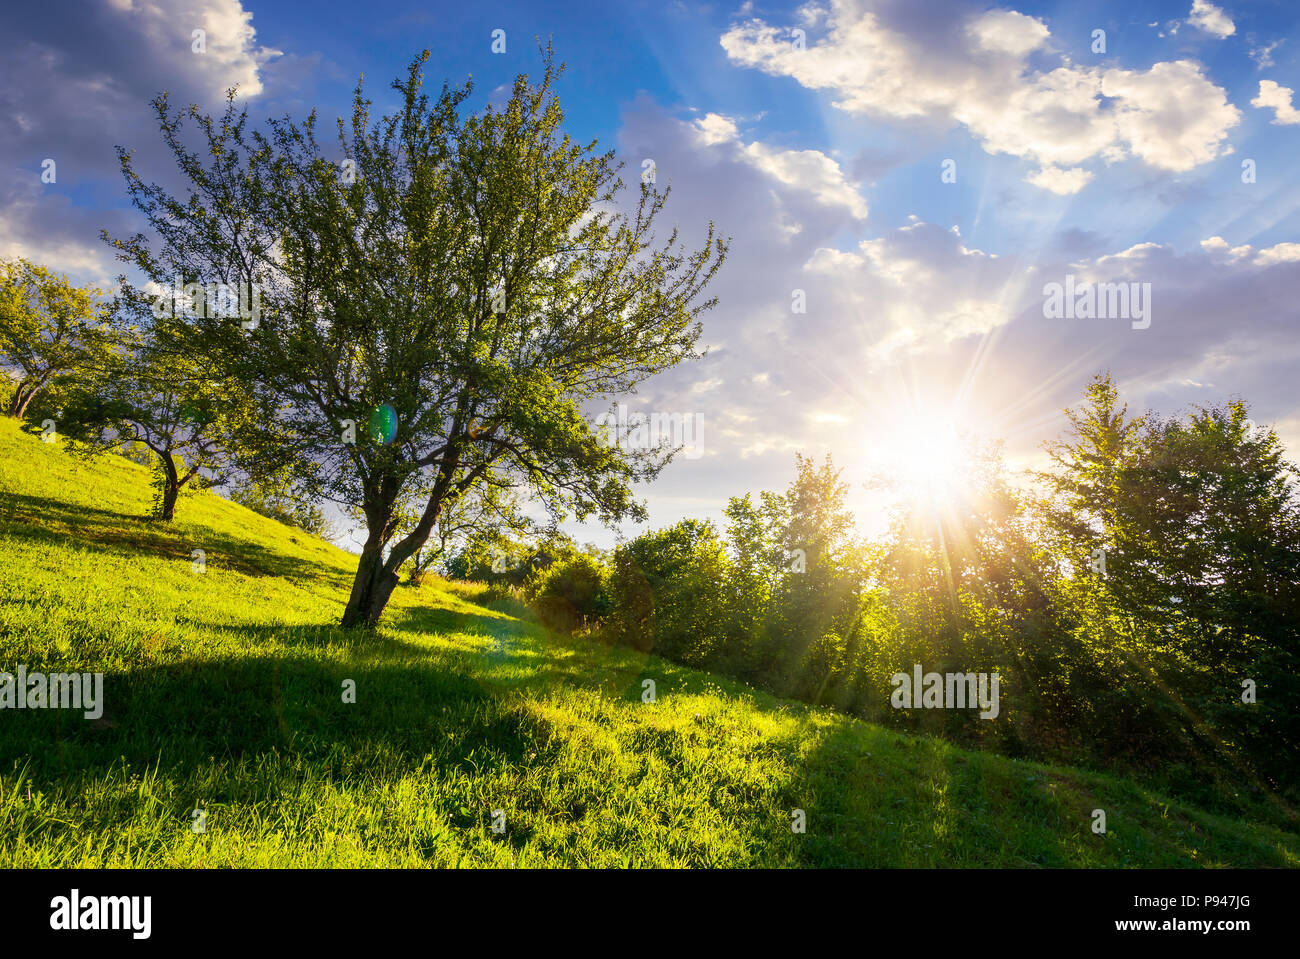 apple orchard on hill side at sunset. lovely rural summer scenery Stock Photo